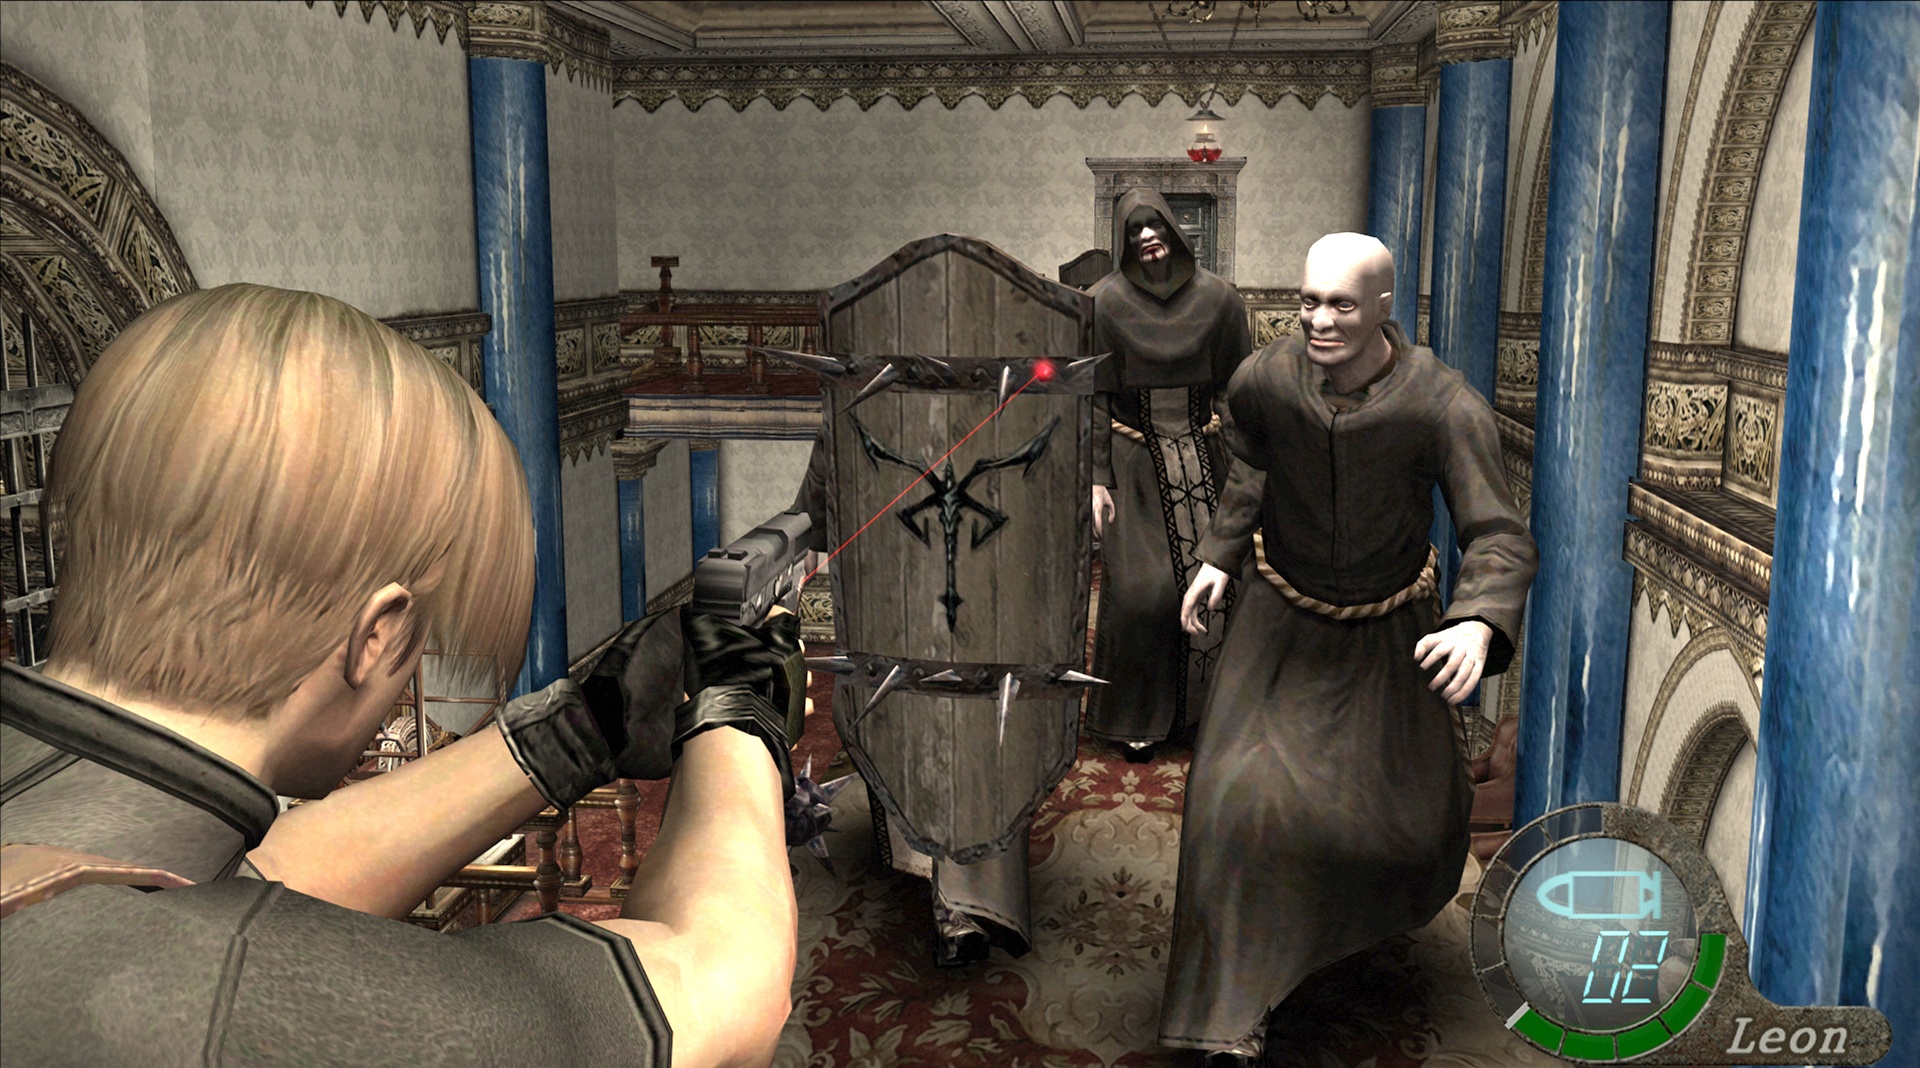 Steam resident evil 4 ultimate hd фото 13